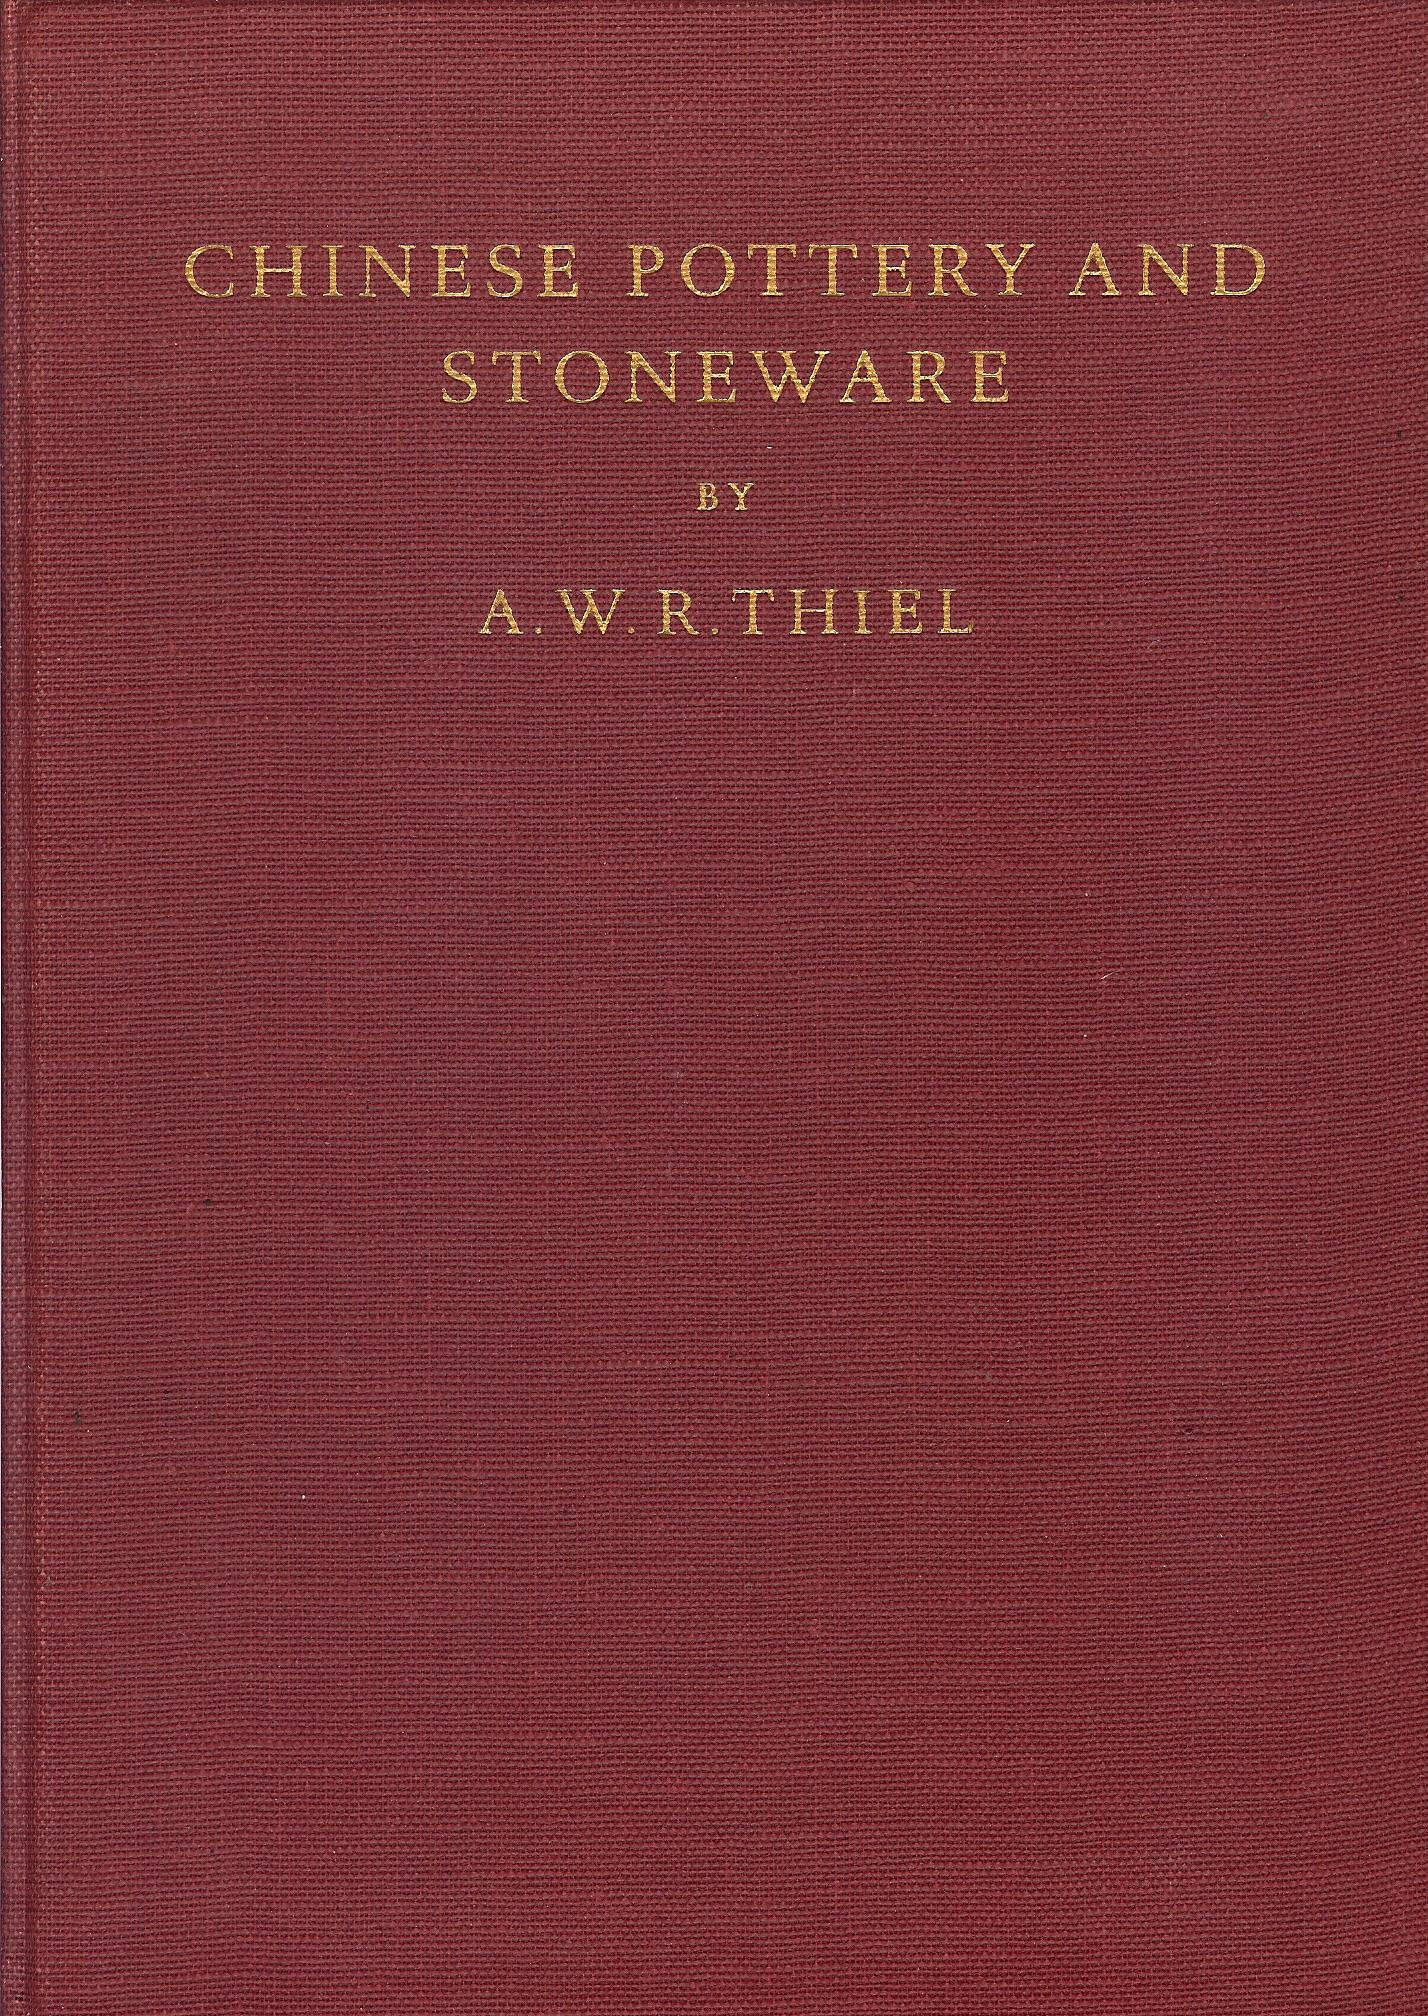 Thiel, A.W.R. - Chinese Pottery and Stoneware